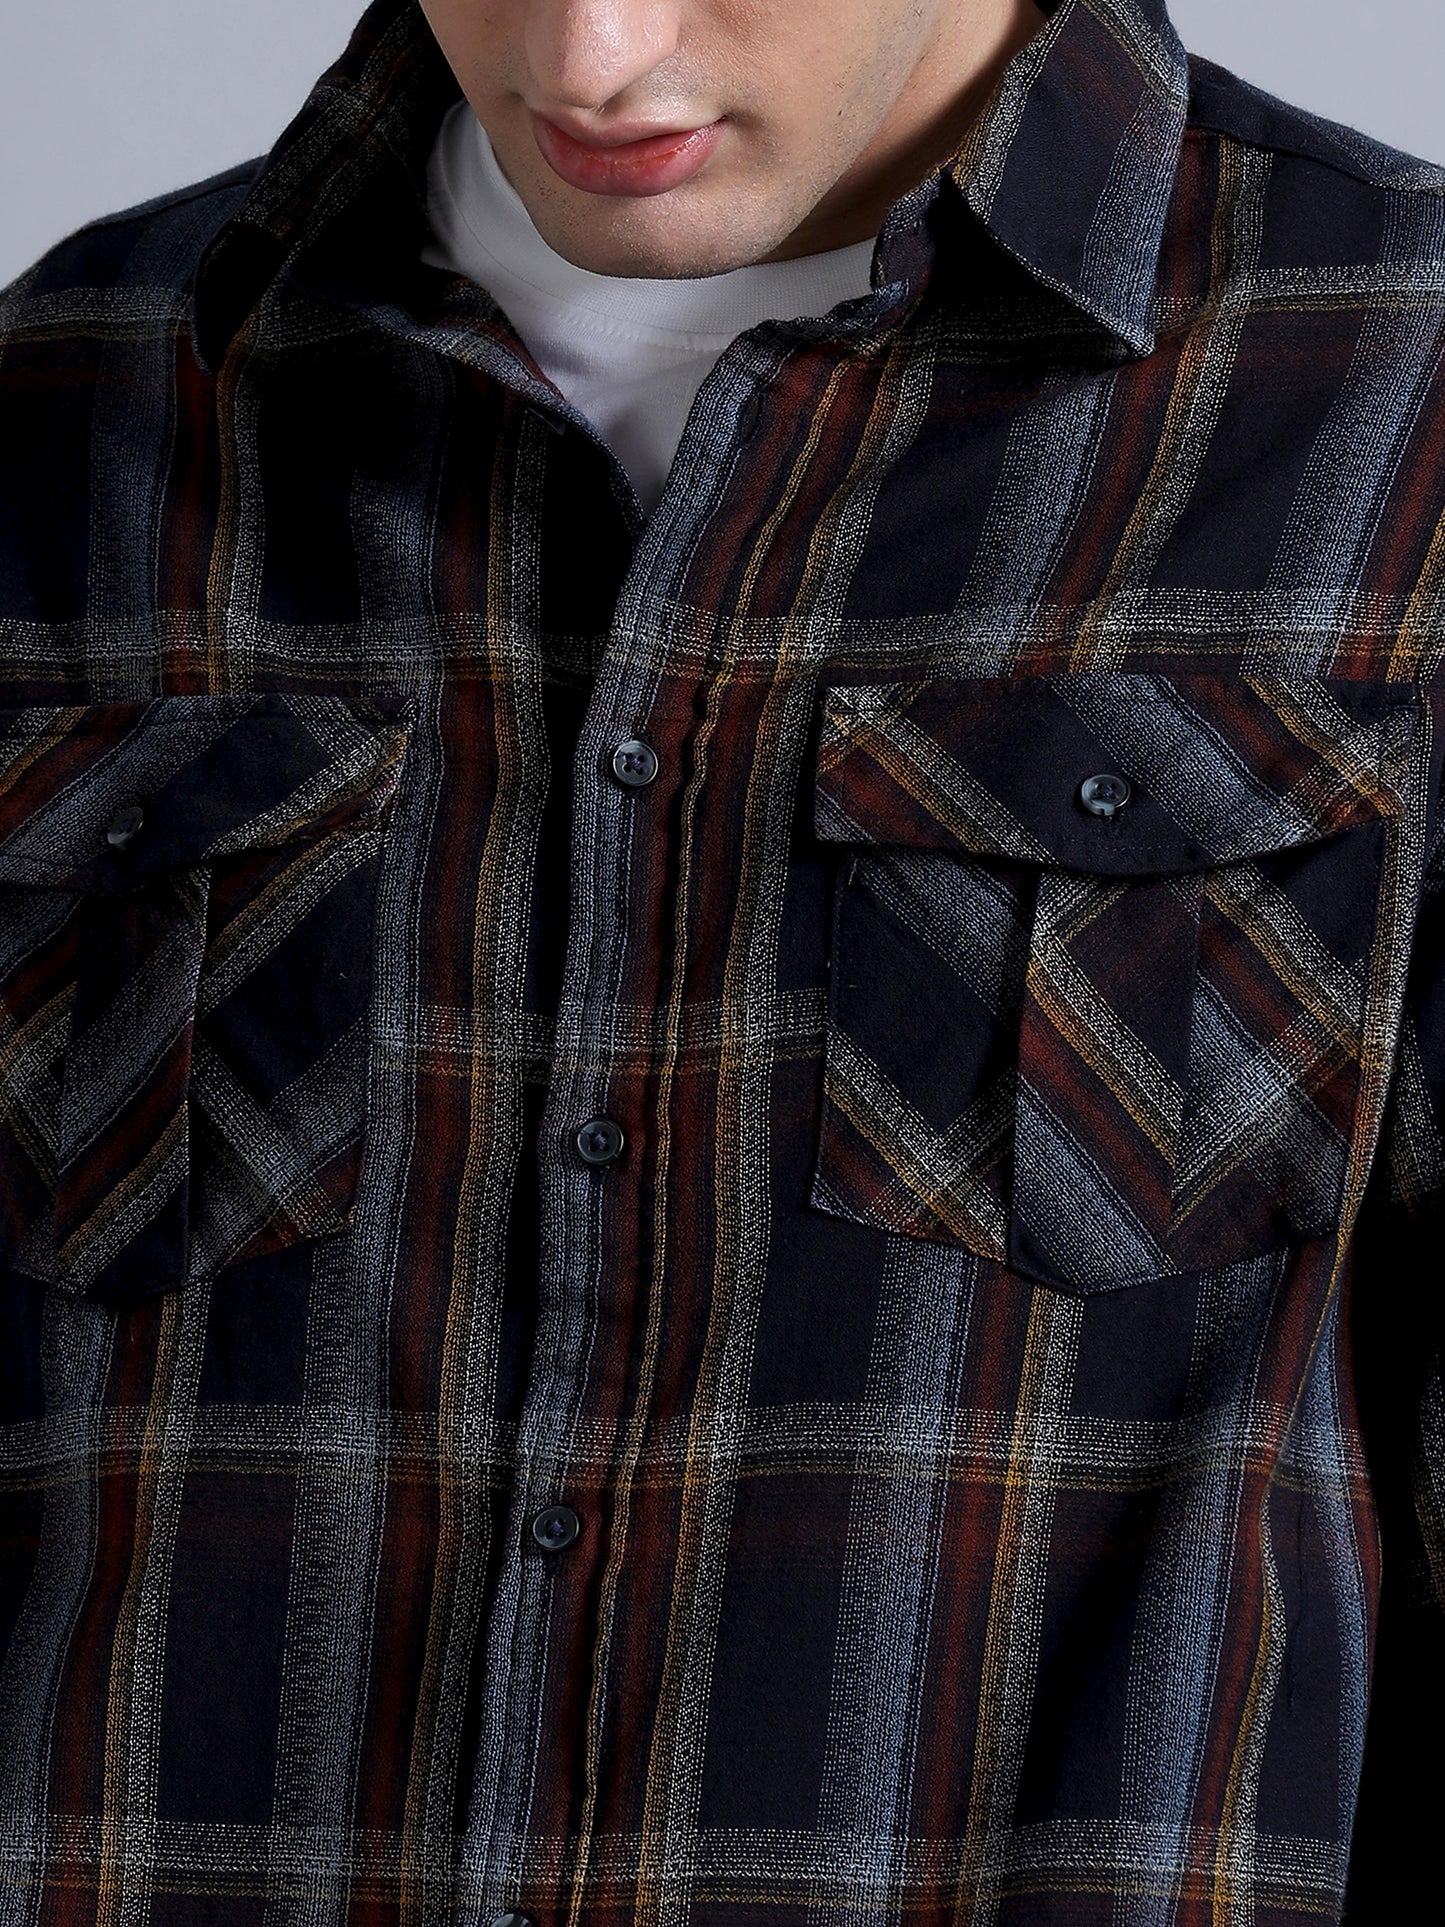 Premium Men Shirt, Relaxed Fit, Yarn Dyed Flannel Check, Pure Cotton, Full Sleeve, Navy Blue & Red